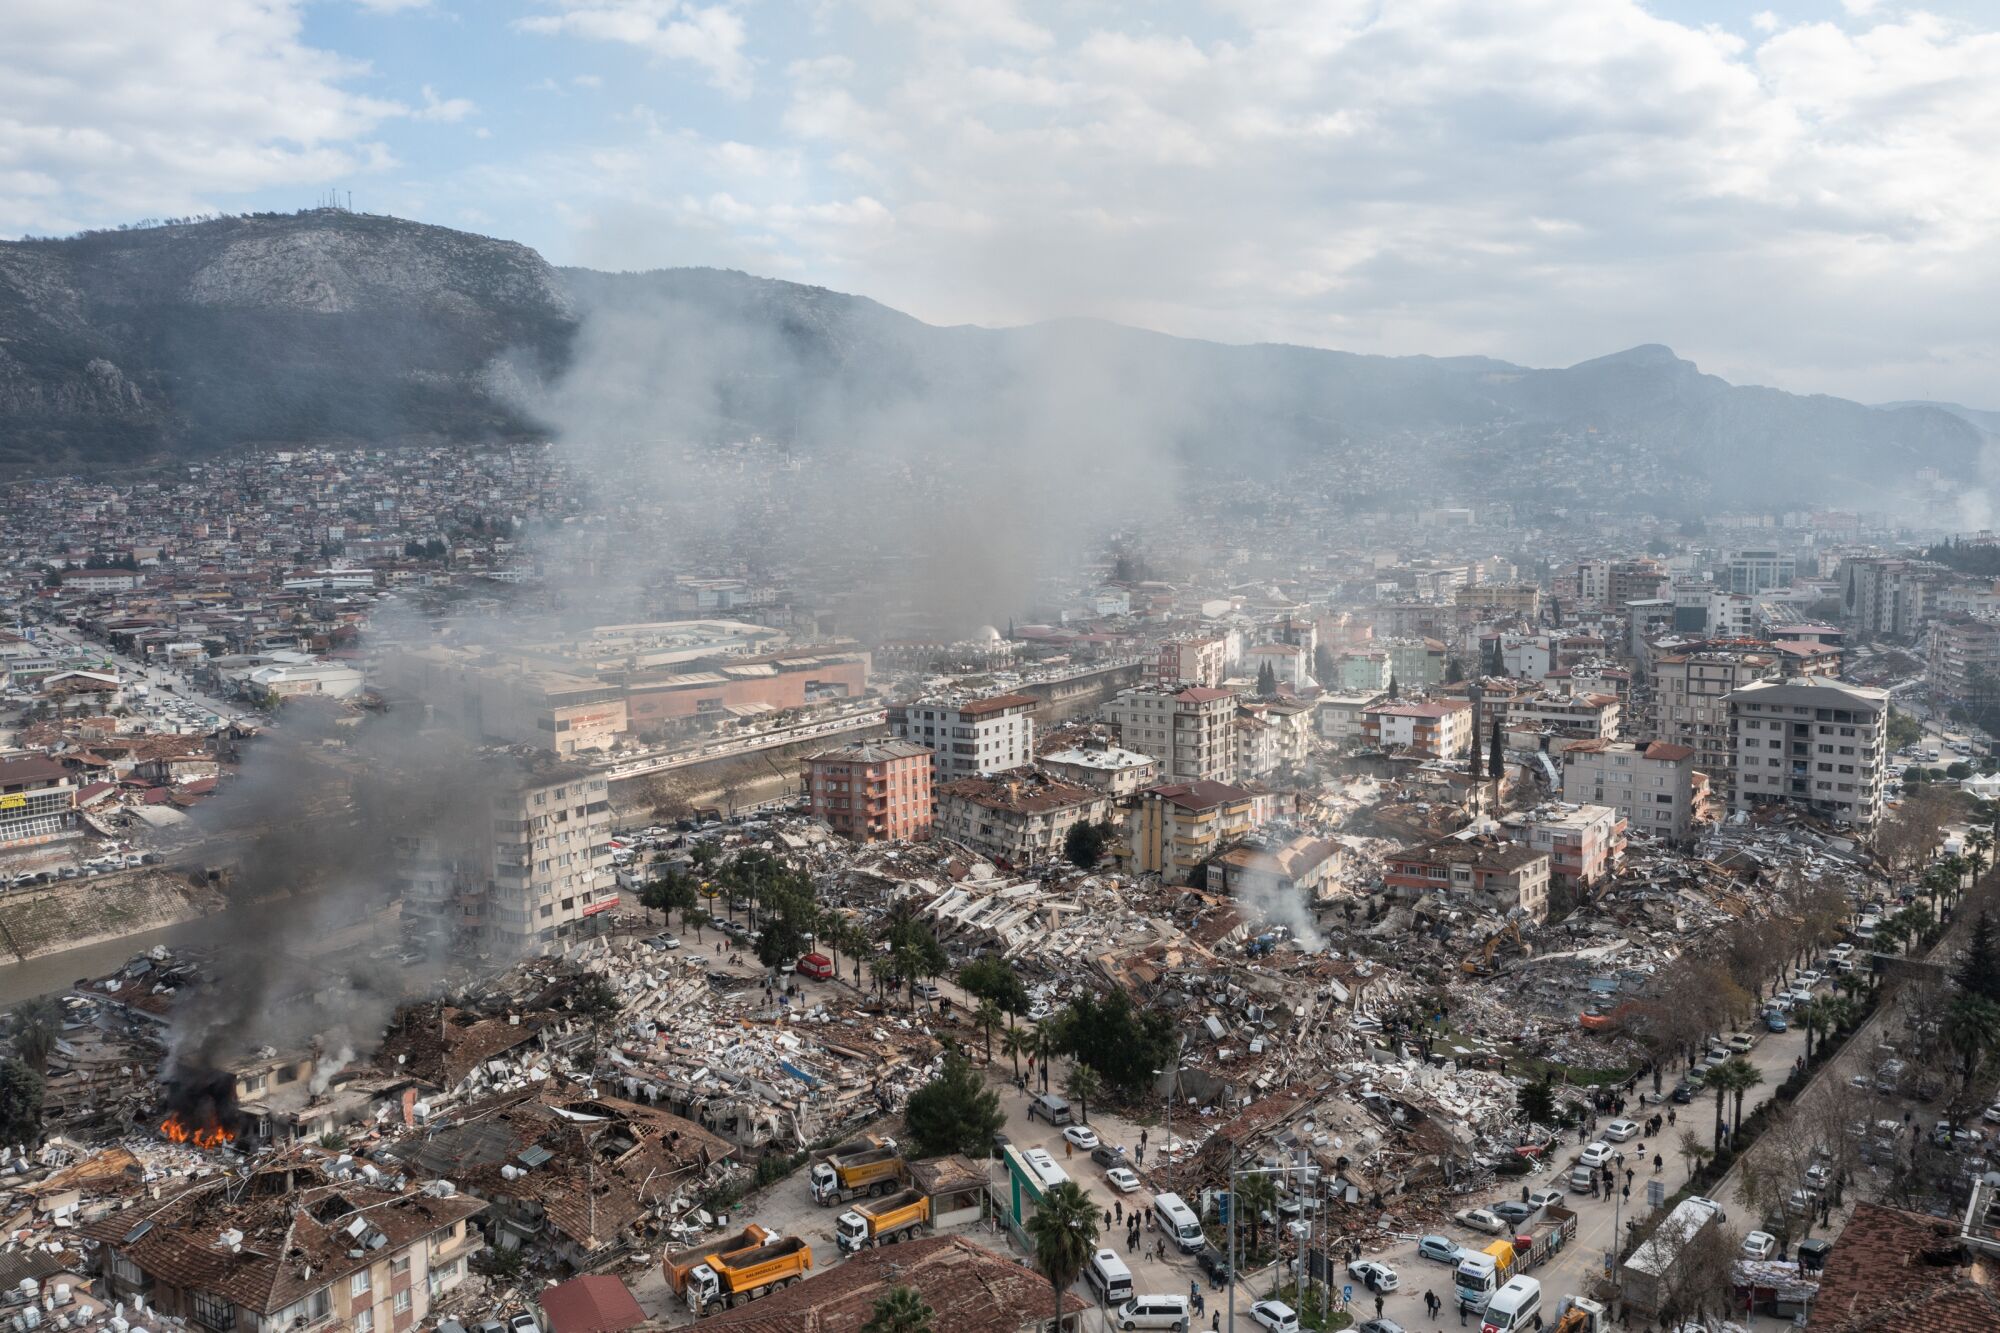 Smoke billows from the scene of collapsed buildings in Hatay, Turkey.